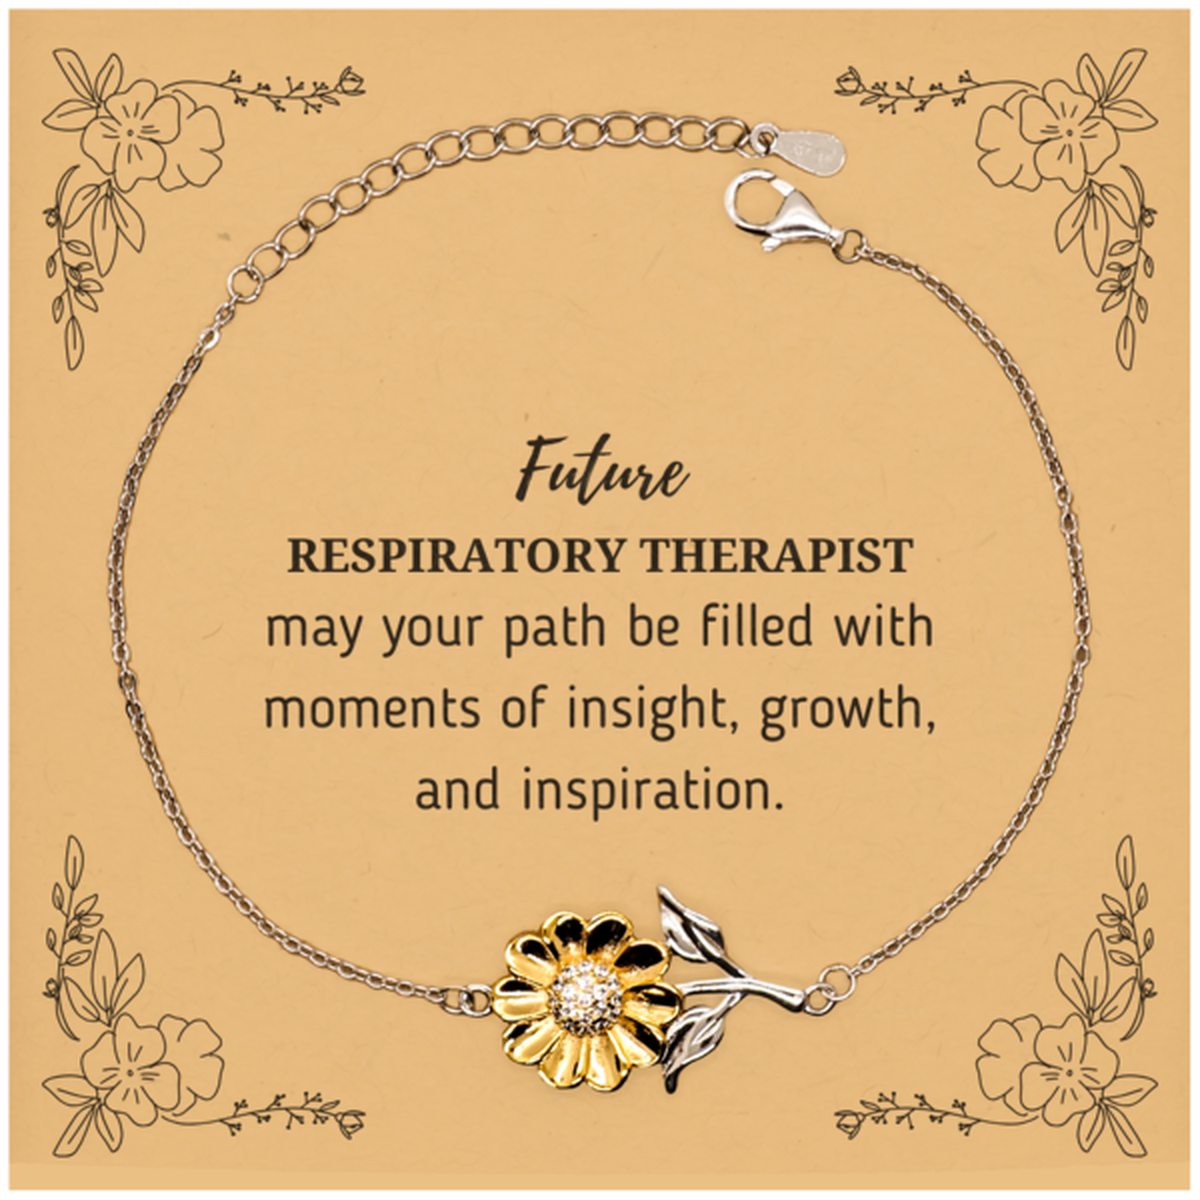 Future Respiratory Therapist Gifts, May your path be filled with moments of insight, Graduation Gifts for New Respiratory Therapist, Christmas Unique Sunflower Bracelet For Men, Women, Friends